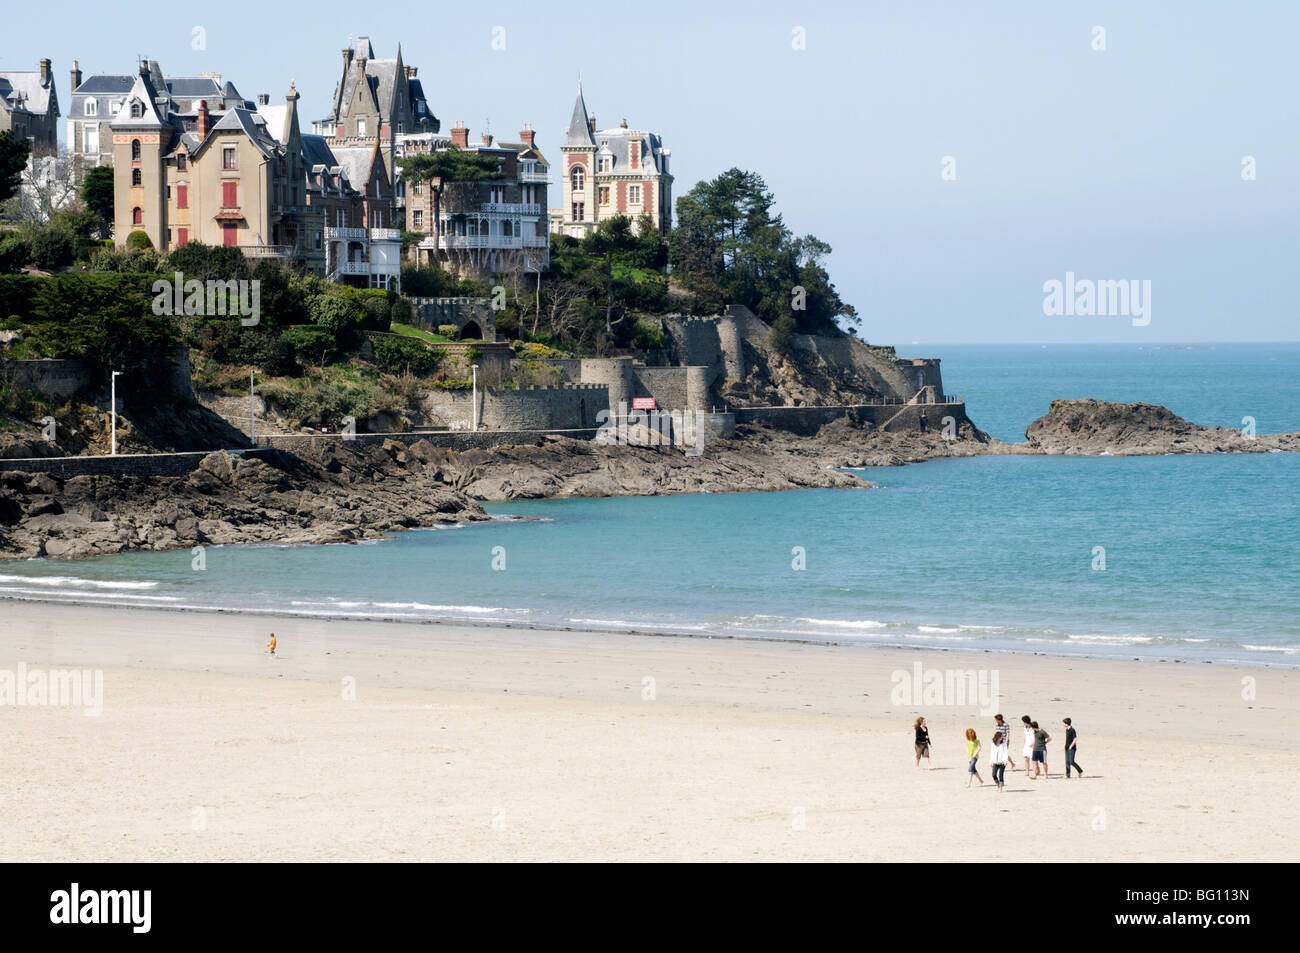 Plage de l'Ecluse (Ecluse Beach) and typical villas, Dinard, Brittany, France, Europe Stock Photo